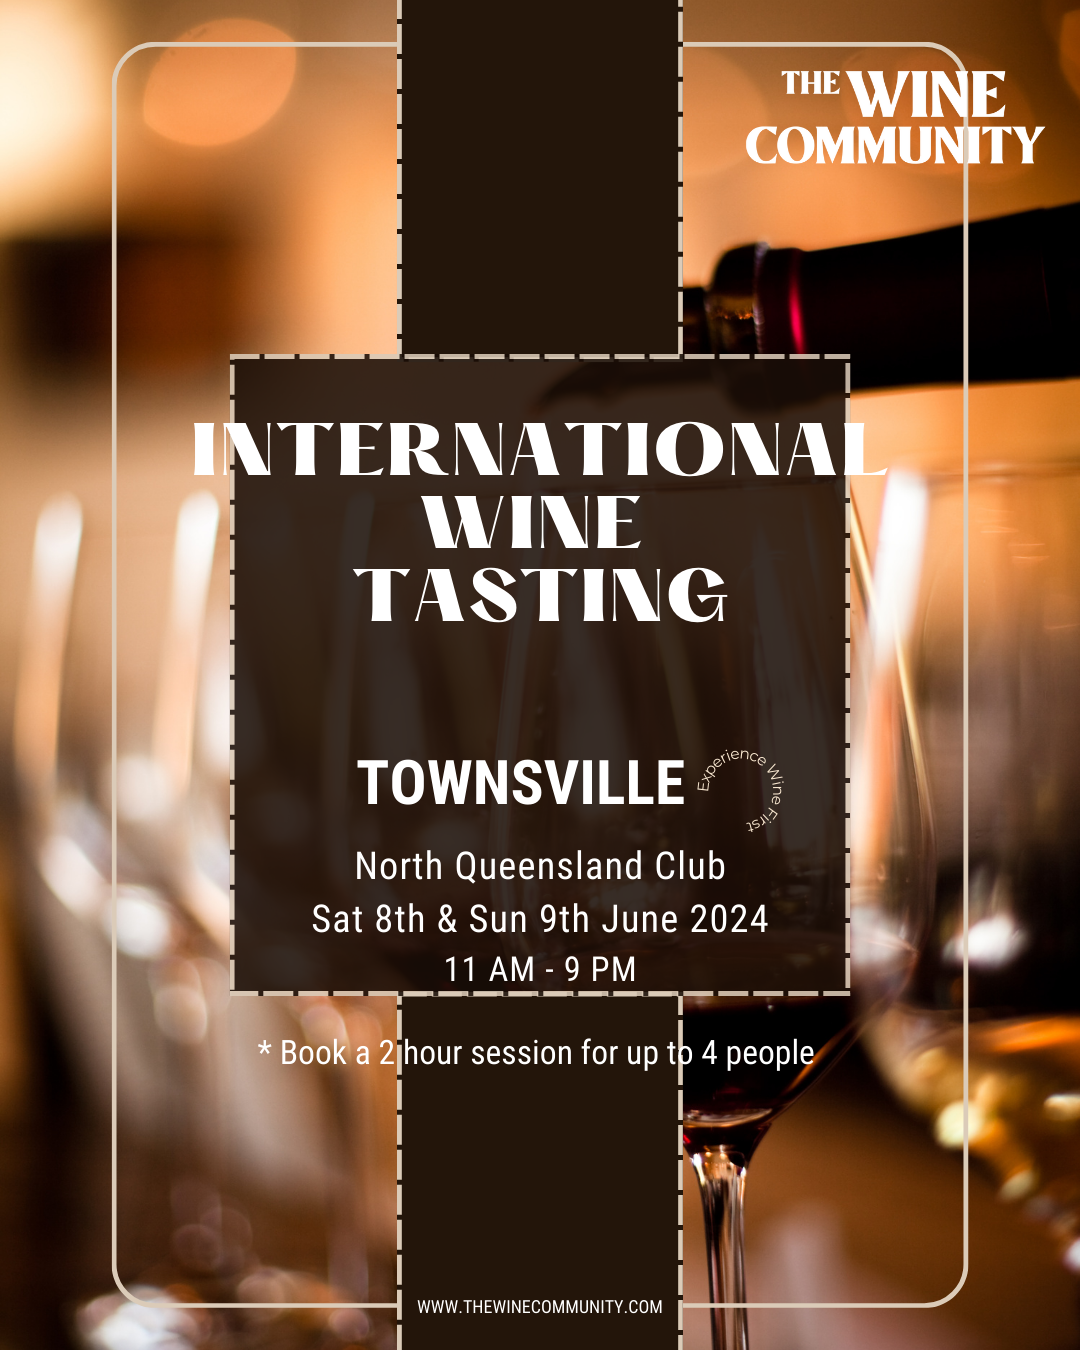 WINE TASTING at Townsville- Sunday 9th June 2024